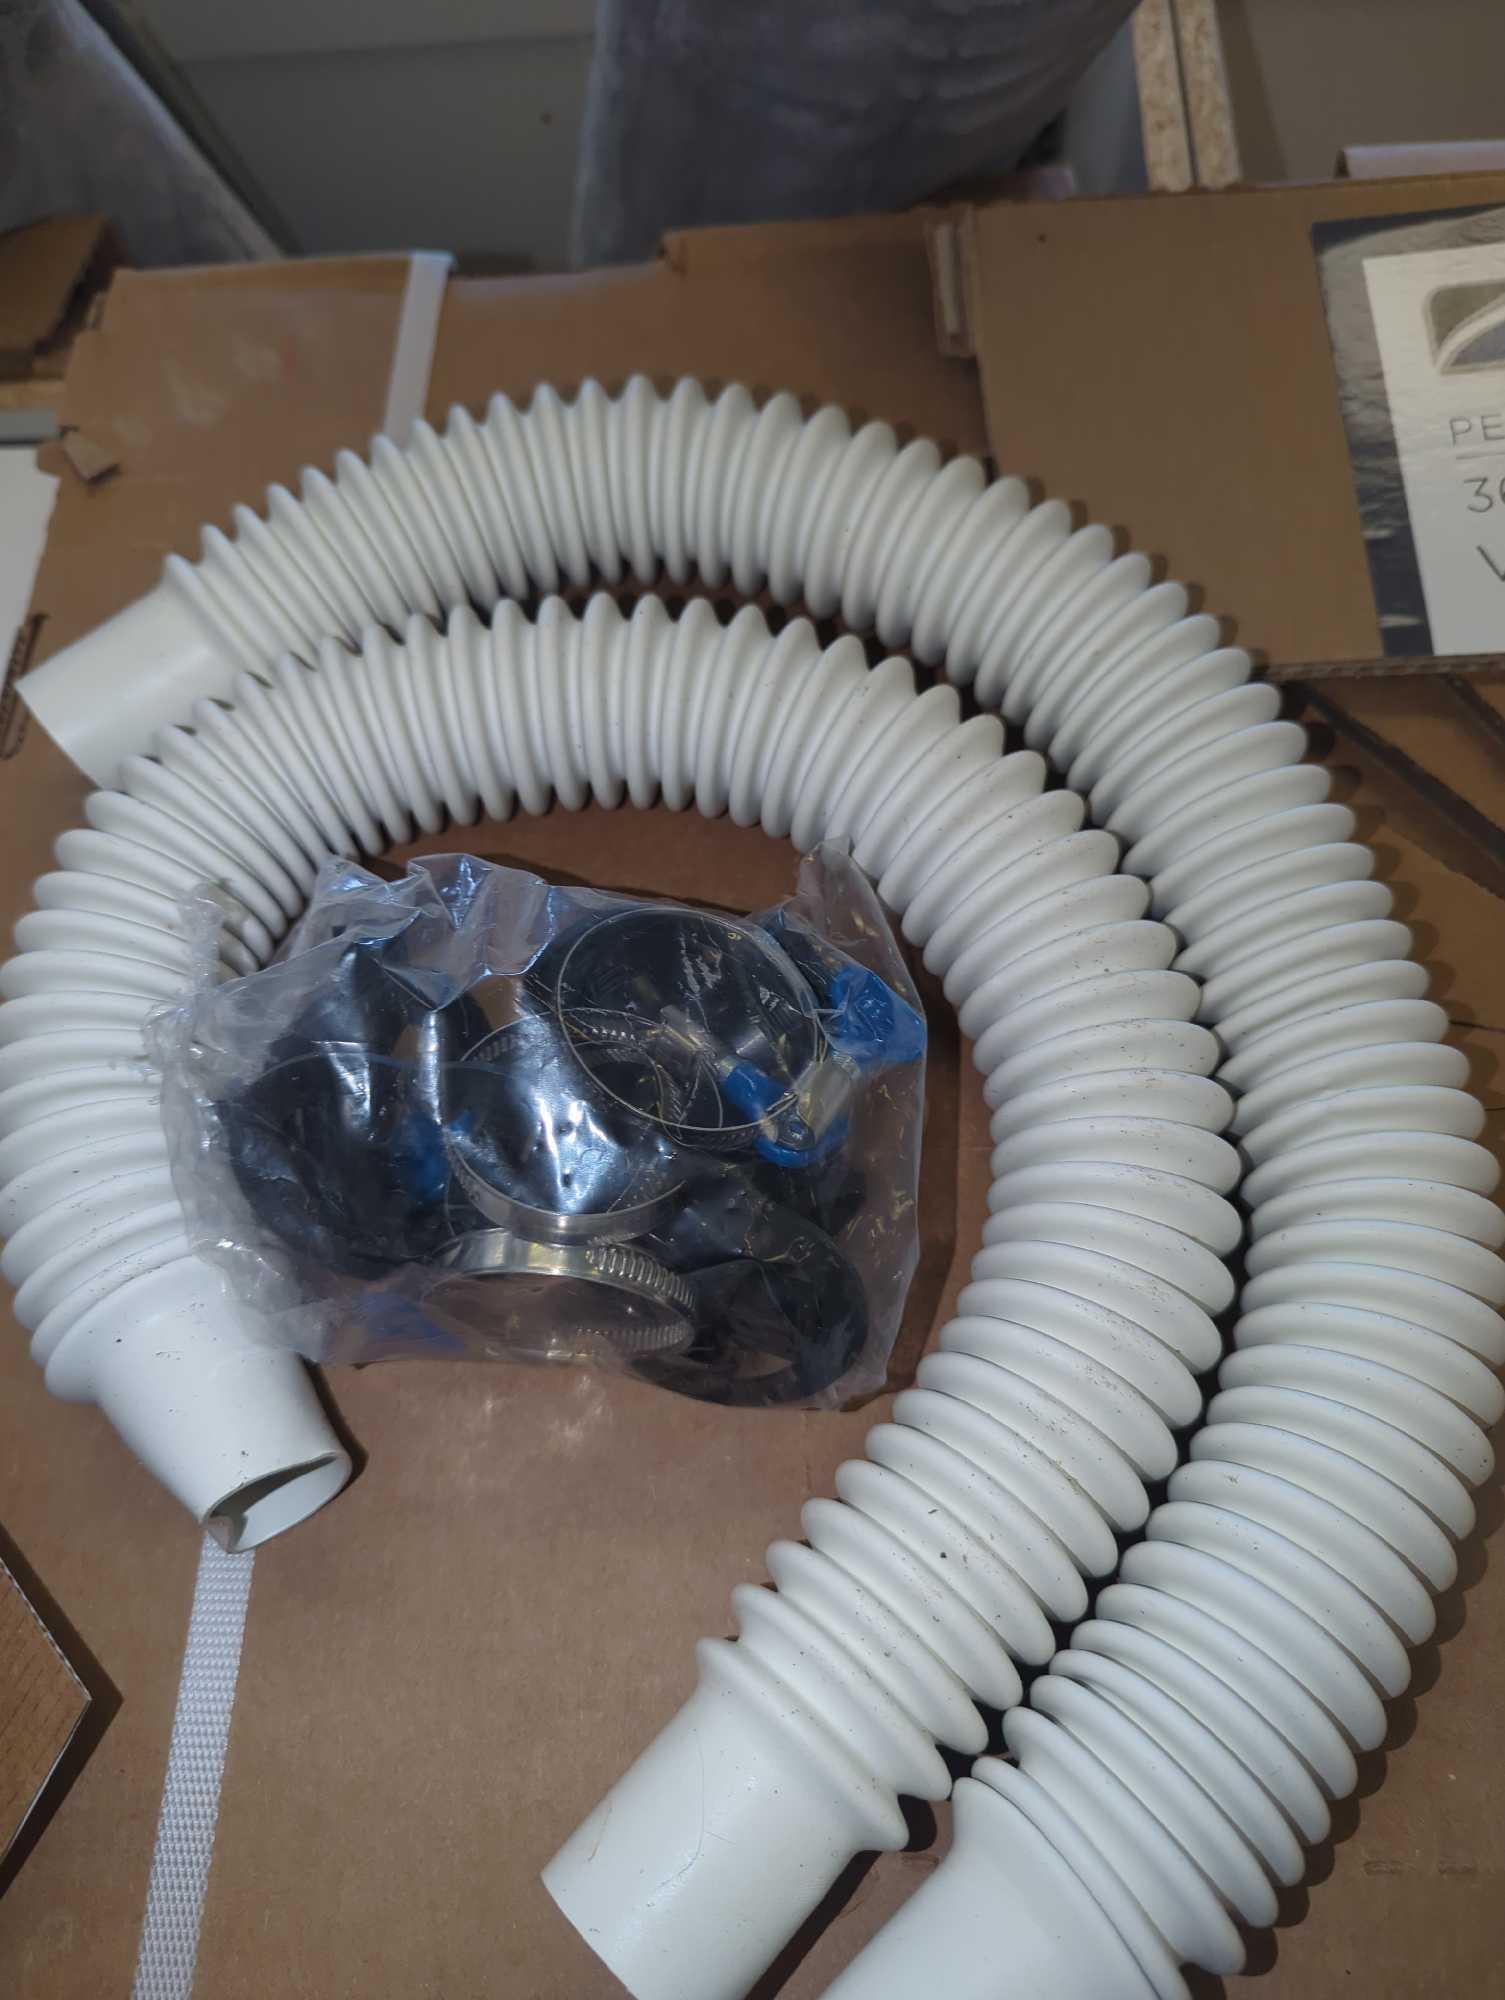 SIMPLE DRAIN (Missing 3rd Hose) 1-1/2 in. White Rubber Threaded All-in-One Drain Kit for Double